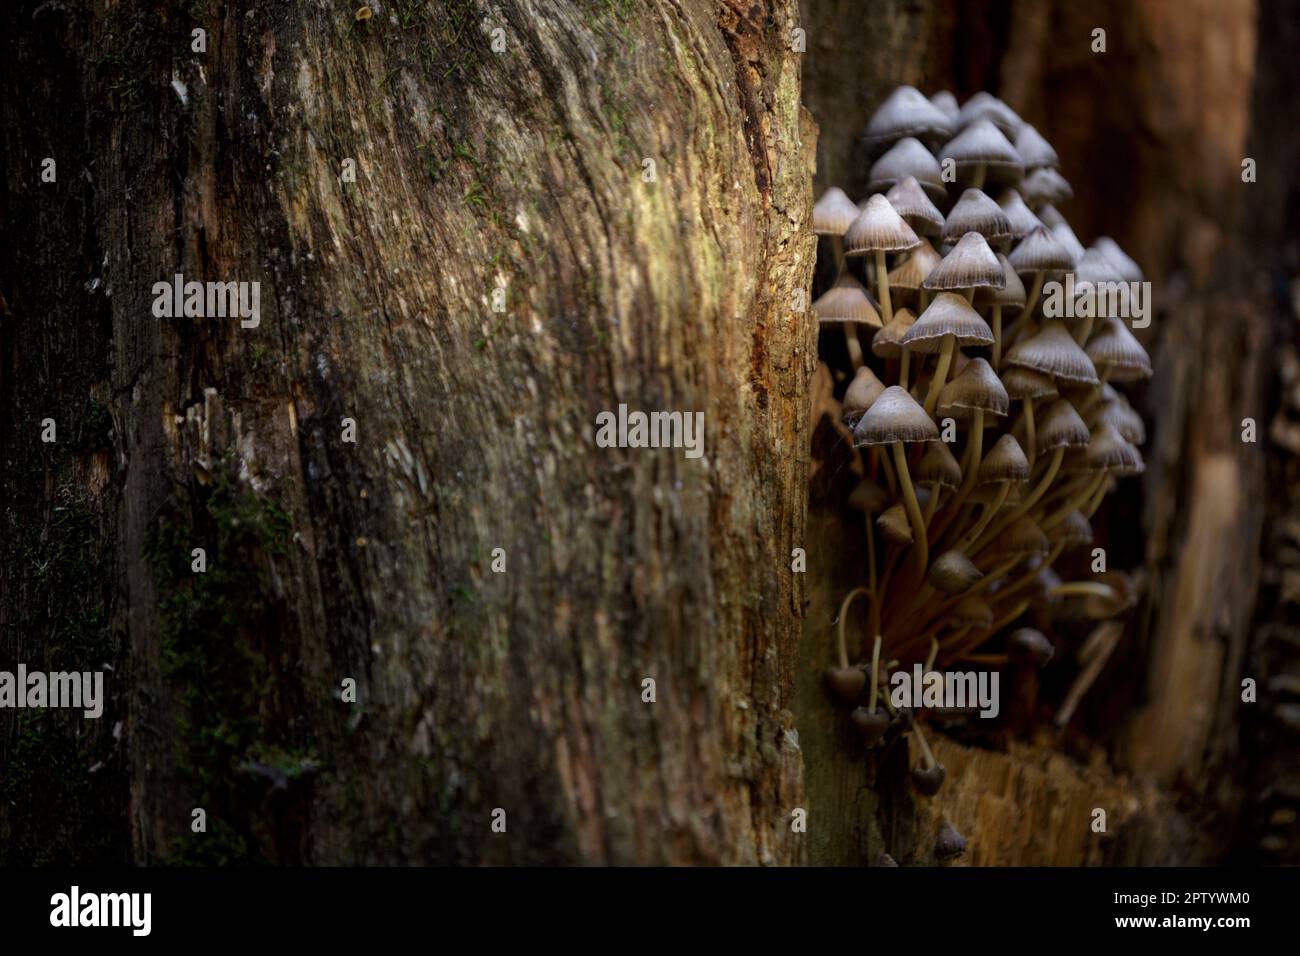 Toadstool, poisonous mushroom. Forest mushrooms on a rotting tree trunk with moss. A group of poisonous mushrooms on rotten stump in the forest Stock Photo